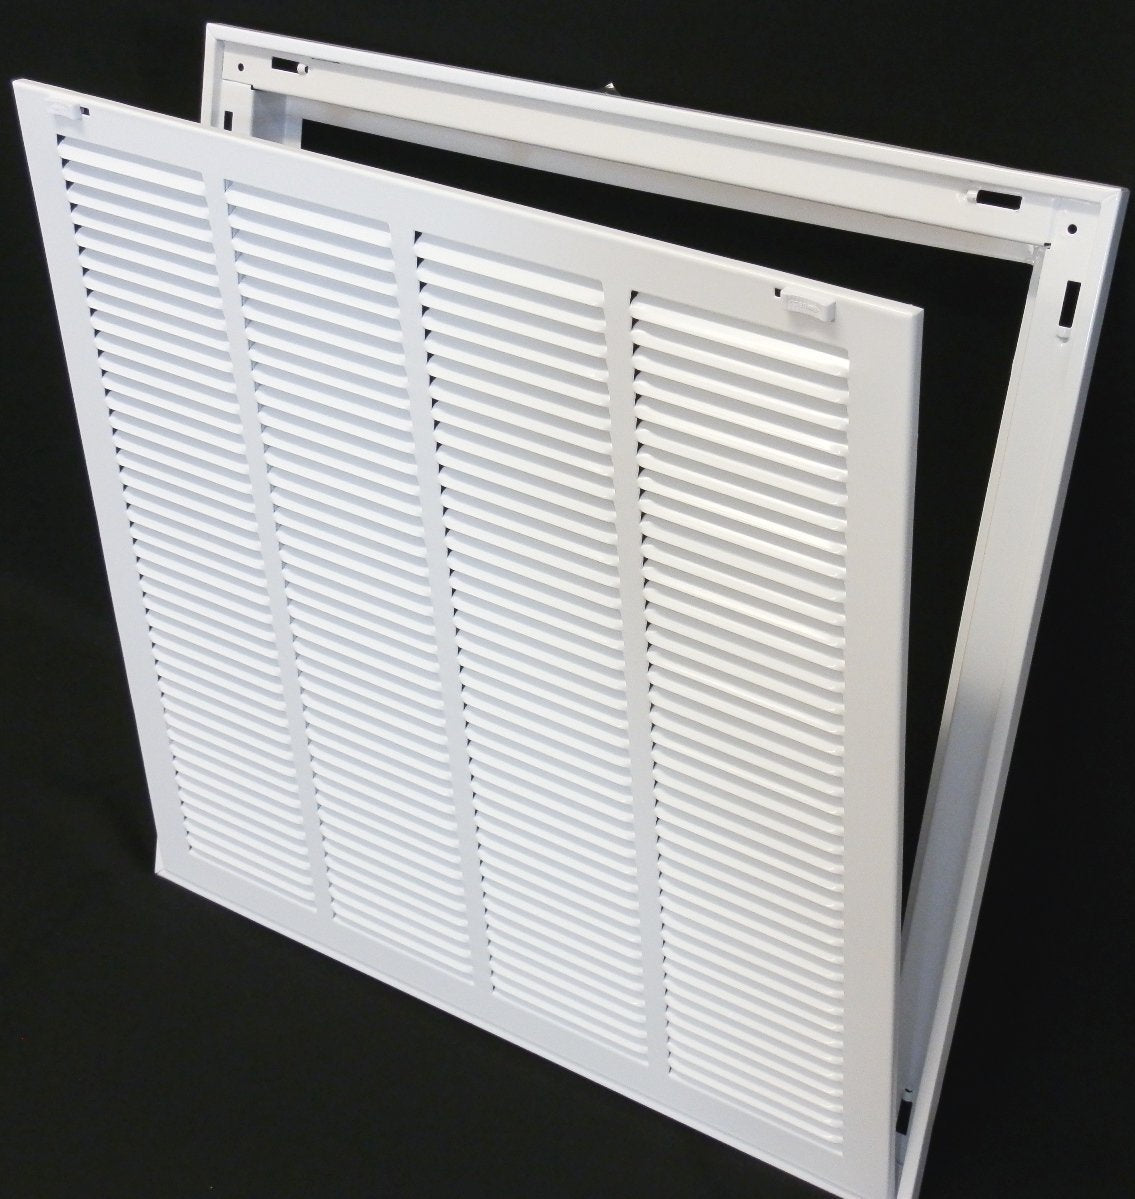 32&quot; X 12&quot; Steel Return Air Filter Grille for 1&quot; Filter - Removable Frame - [Outer Dimensions: 34 5/8&quot; X 14 5/8&quot;]